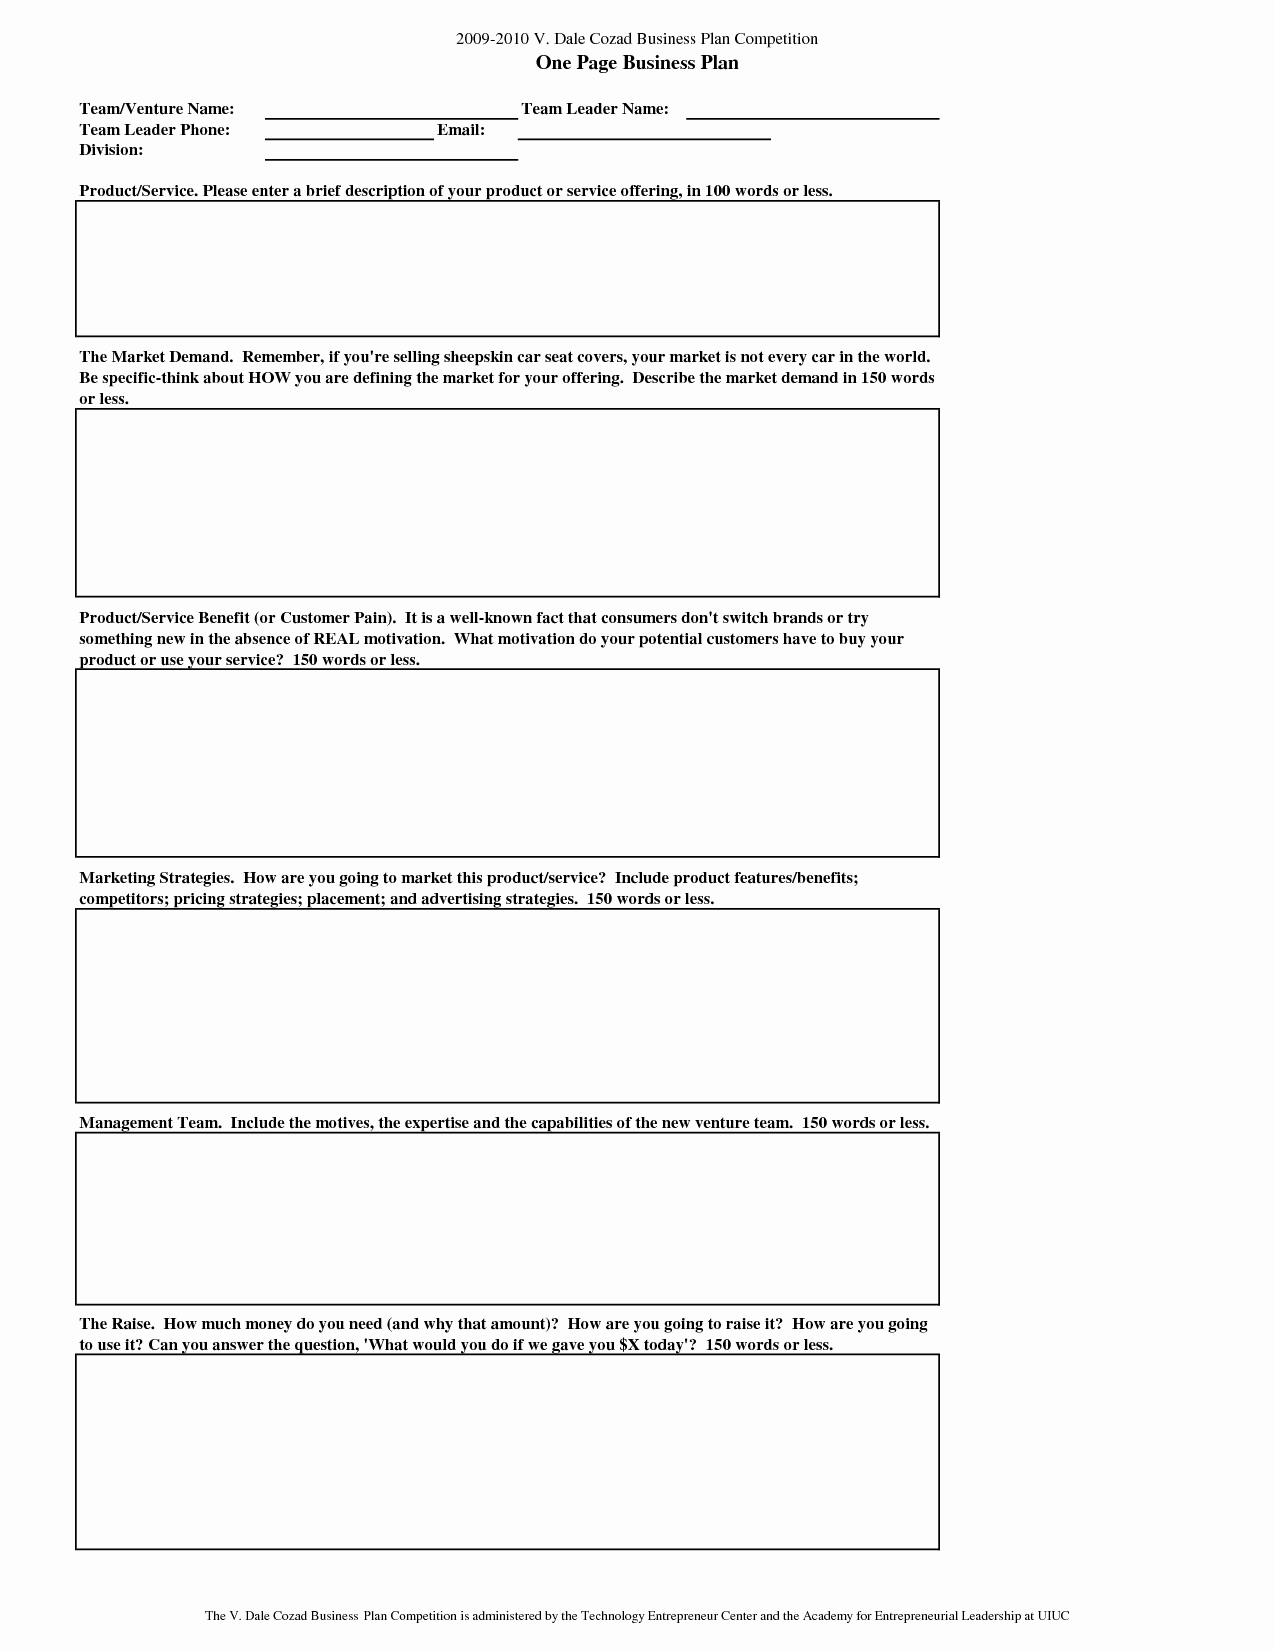 One Page Business Plan Template Awesome One Page Business Plan Template by Dale Cozad